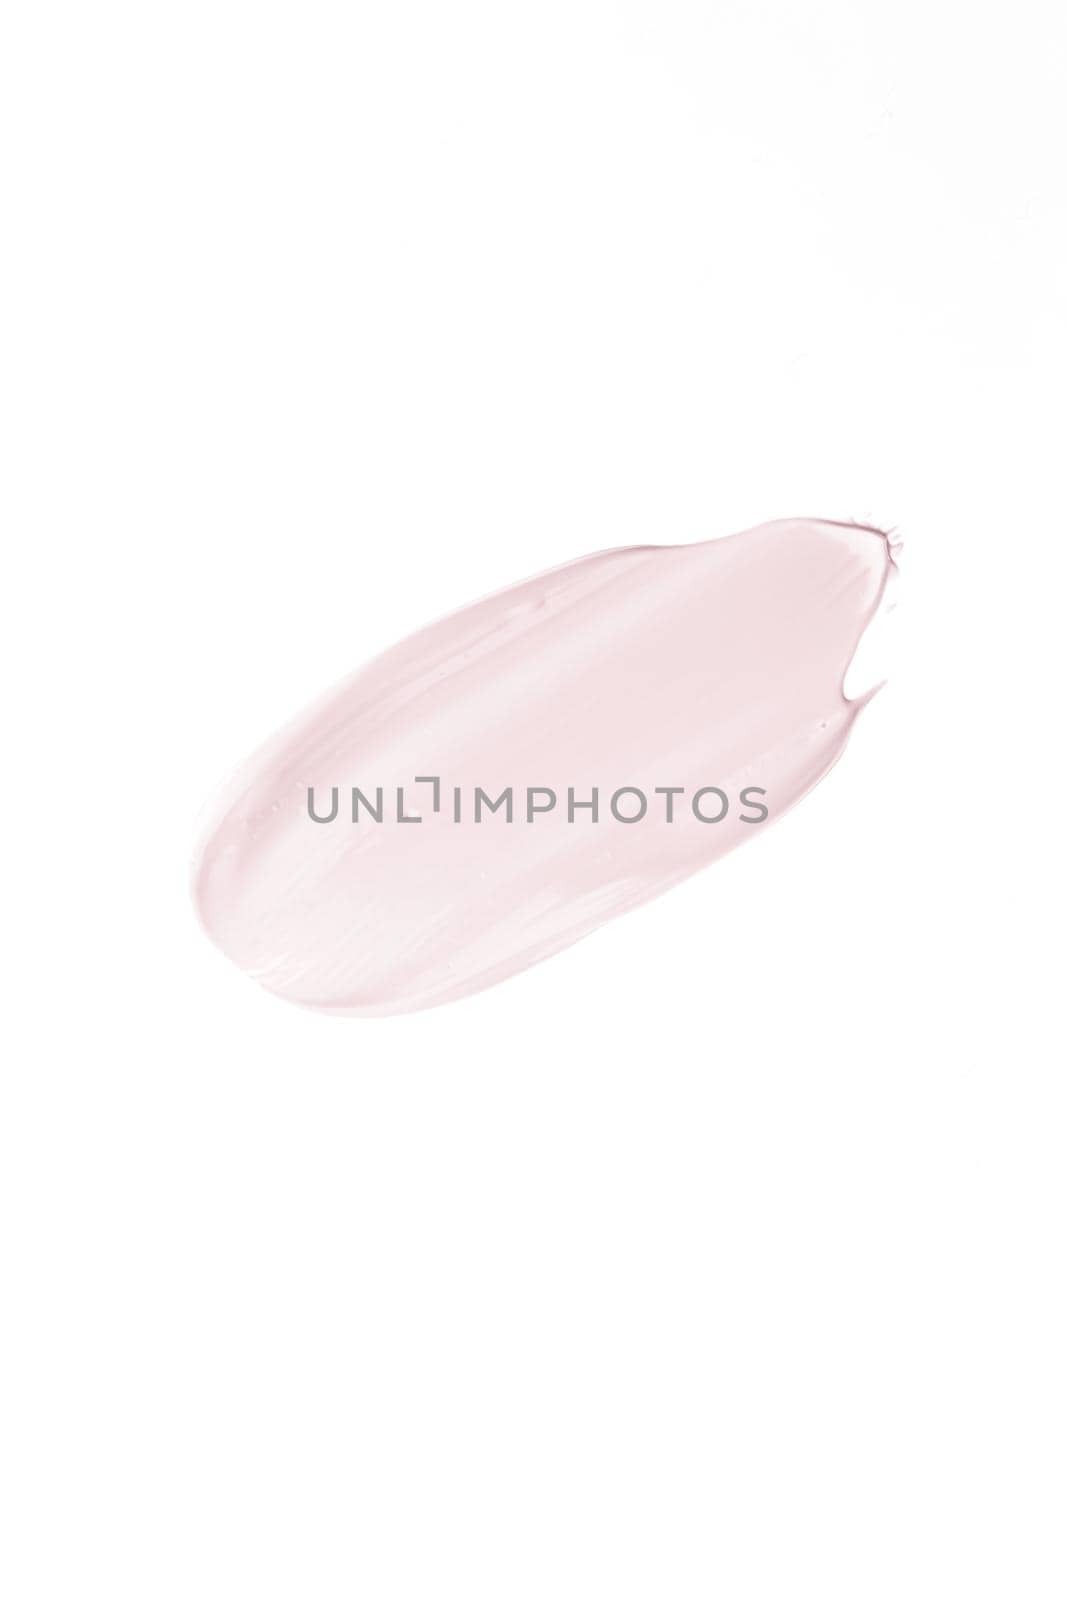 Pastel beauty swatch, skincare and makeup cosmetic product sample texture isolated on white background, make-up smudge, cream cosmetics smear or paint brush stroke closeup